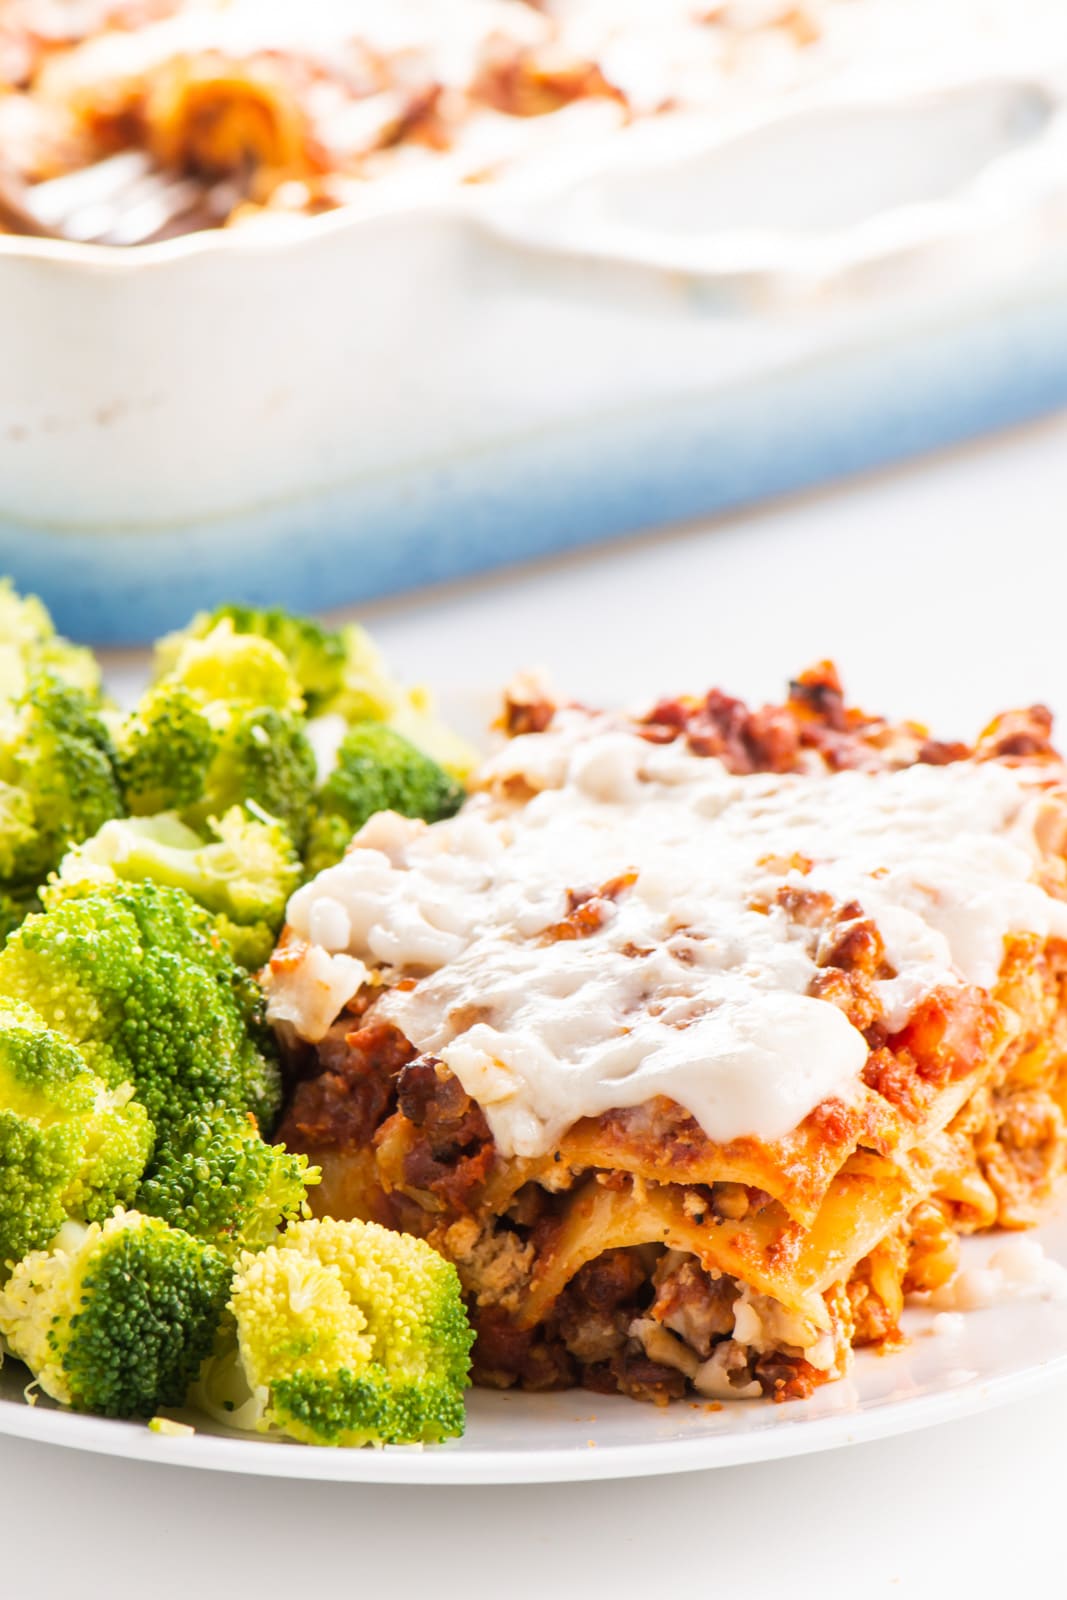 A slice of vegan lasagna sits next to steamed broccoli in front of the rest of the dish.